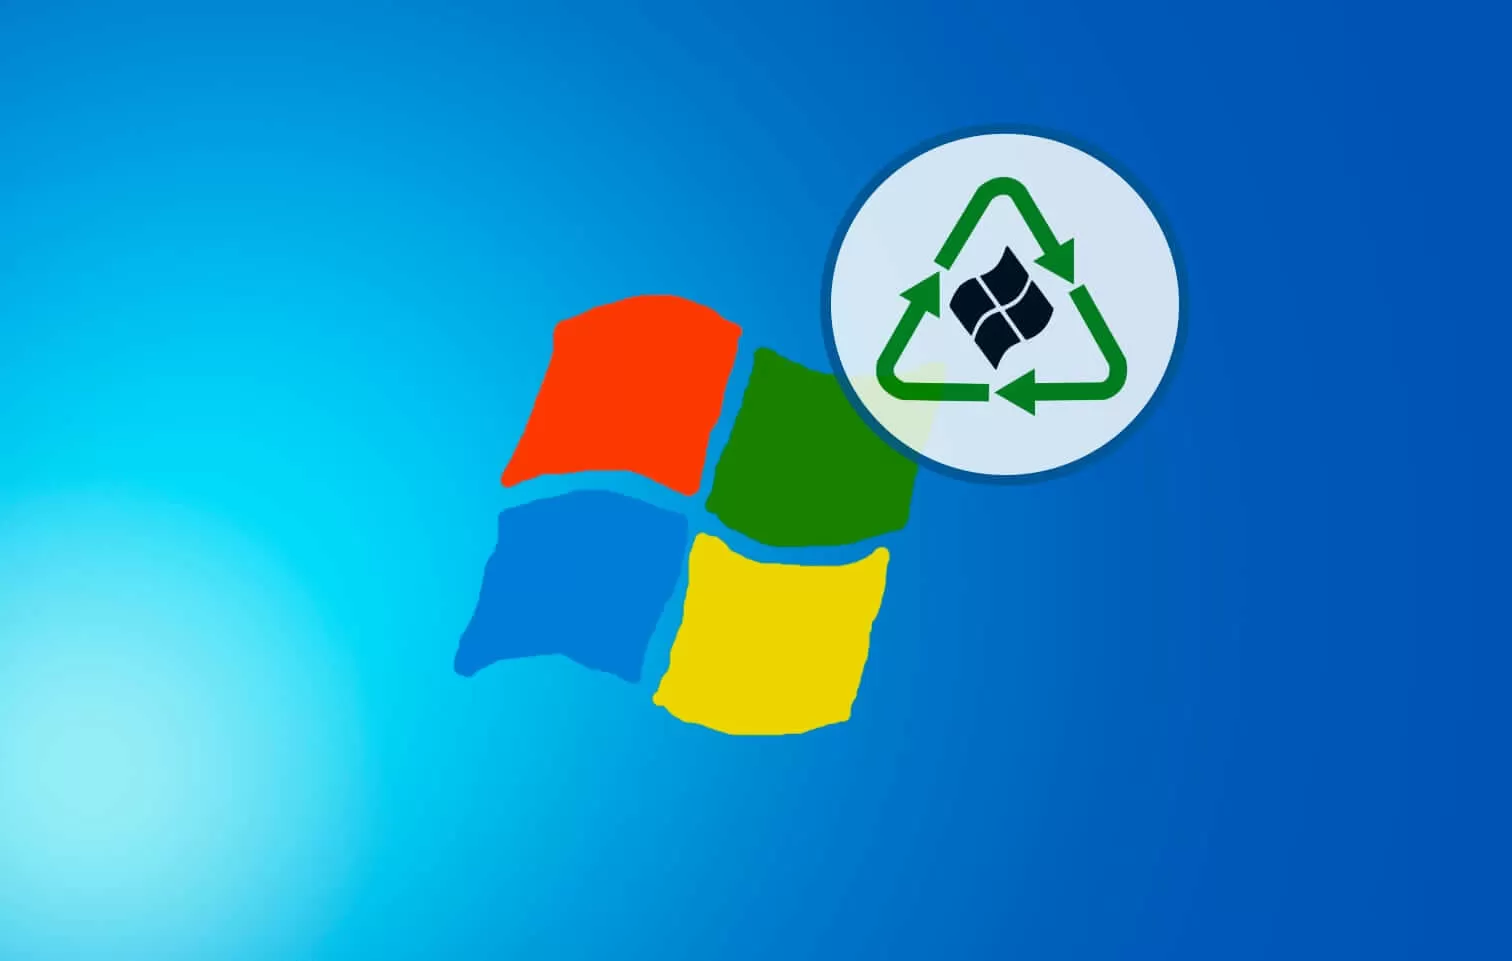 Free Software Foundation 'demands' Windows 7 be released as free software